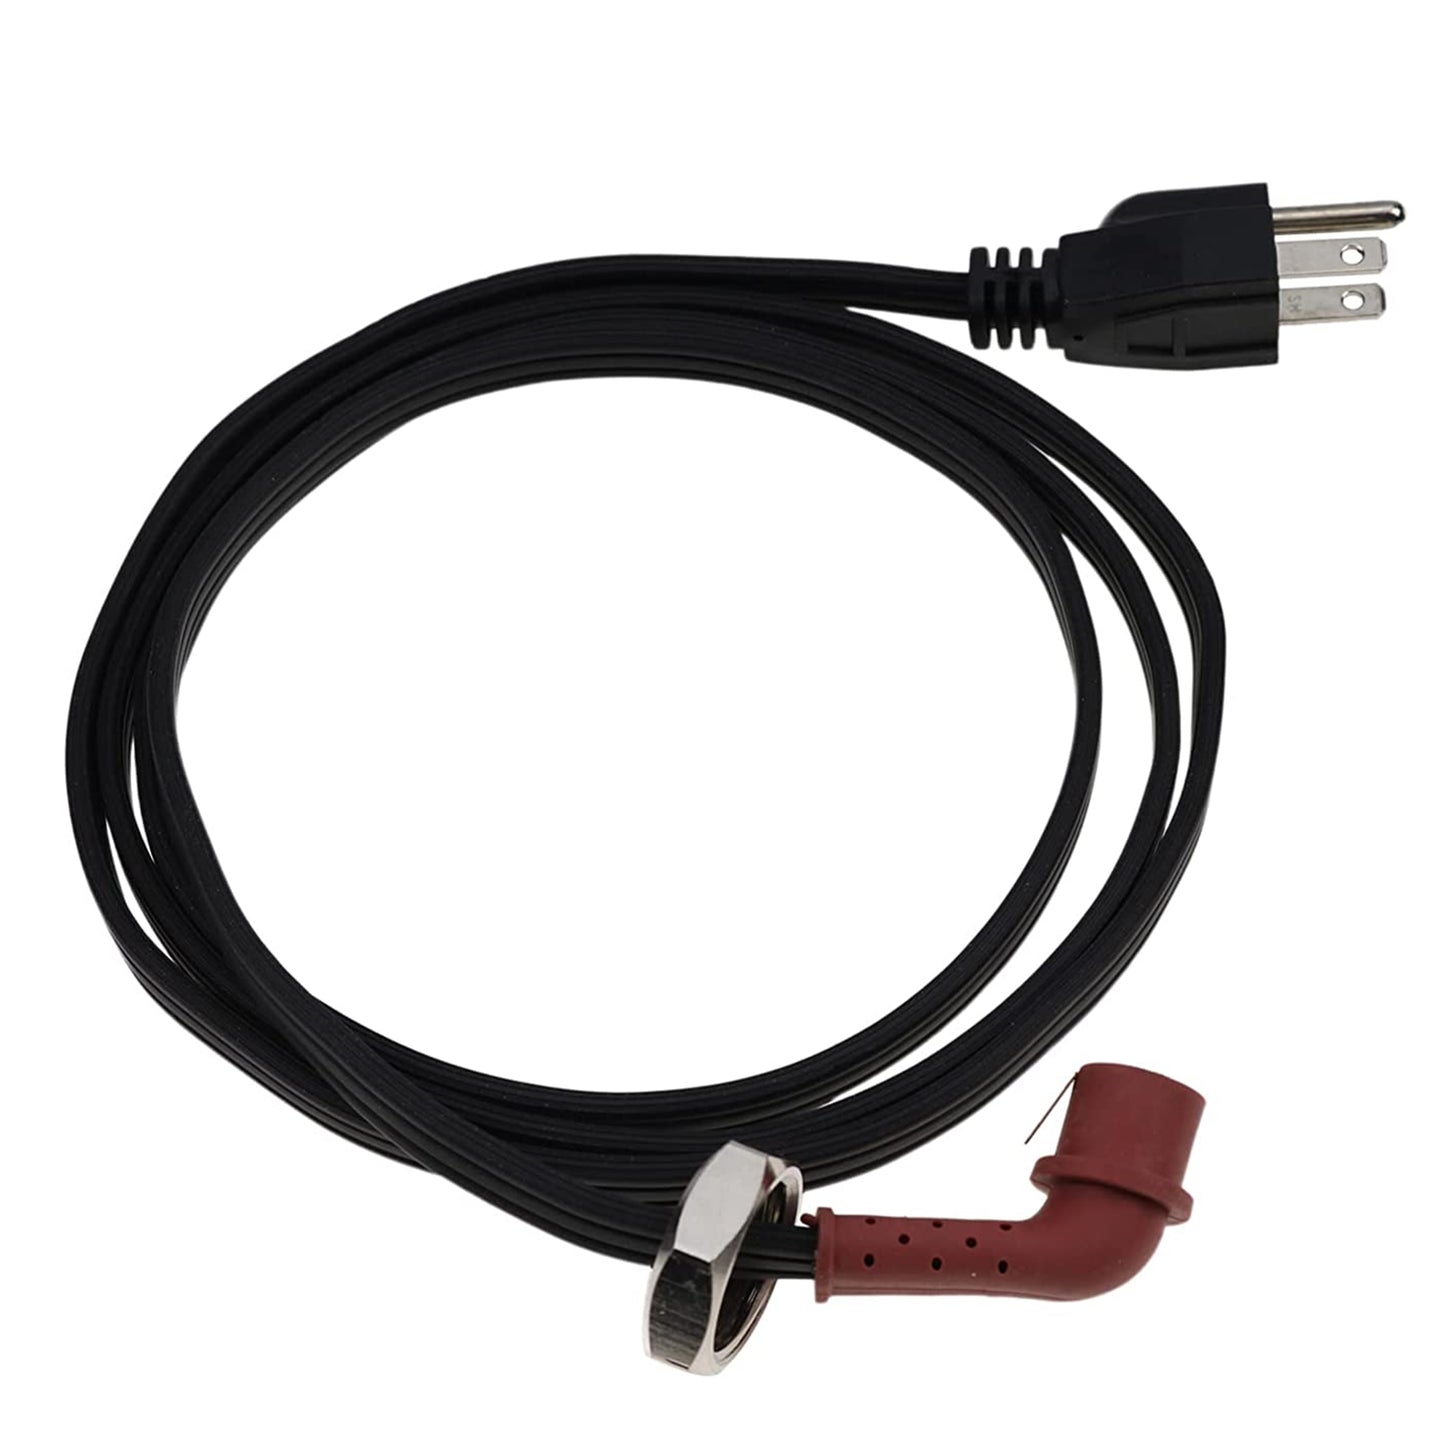 New 120V Block Heater Cord Cordset 3600008 251919 Compatible with Ford 7.3 6.0 6.4 6.7 L Powerstroke Diesel F350 250 F250 Fits Heavy Duty Immersion Heaters and Engine Block Heaters